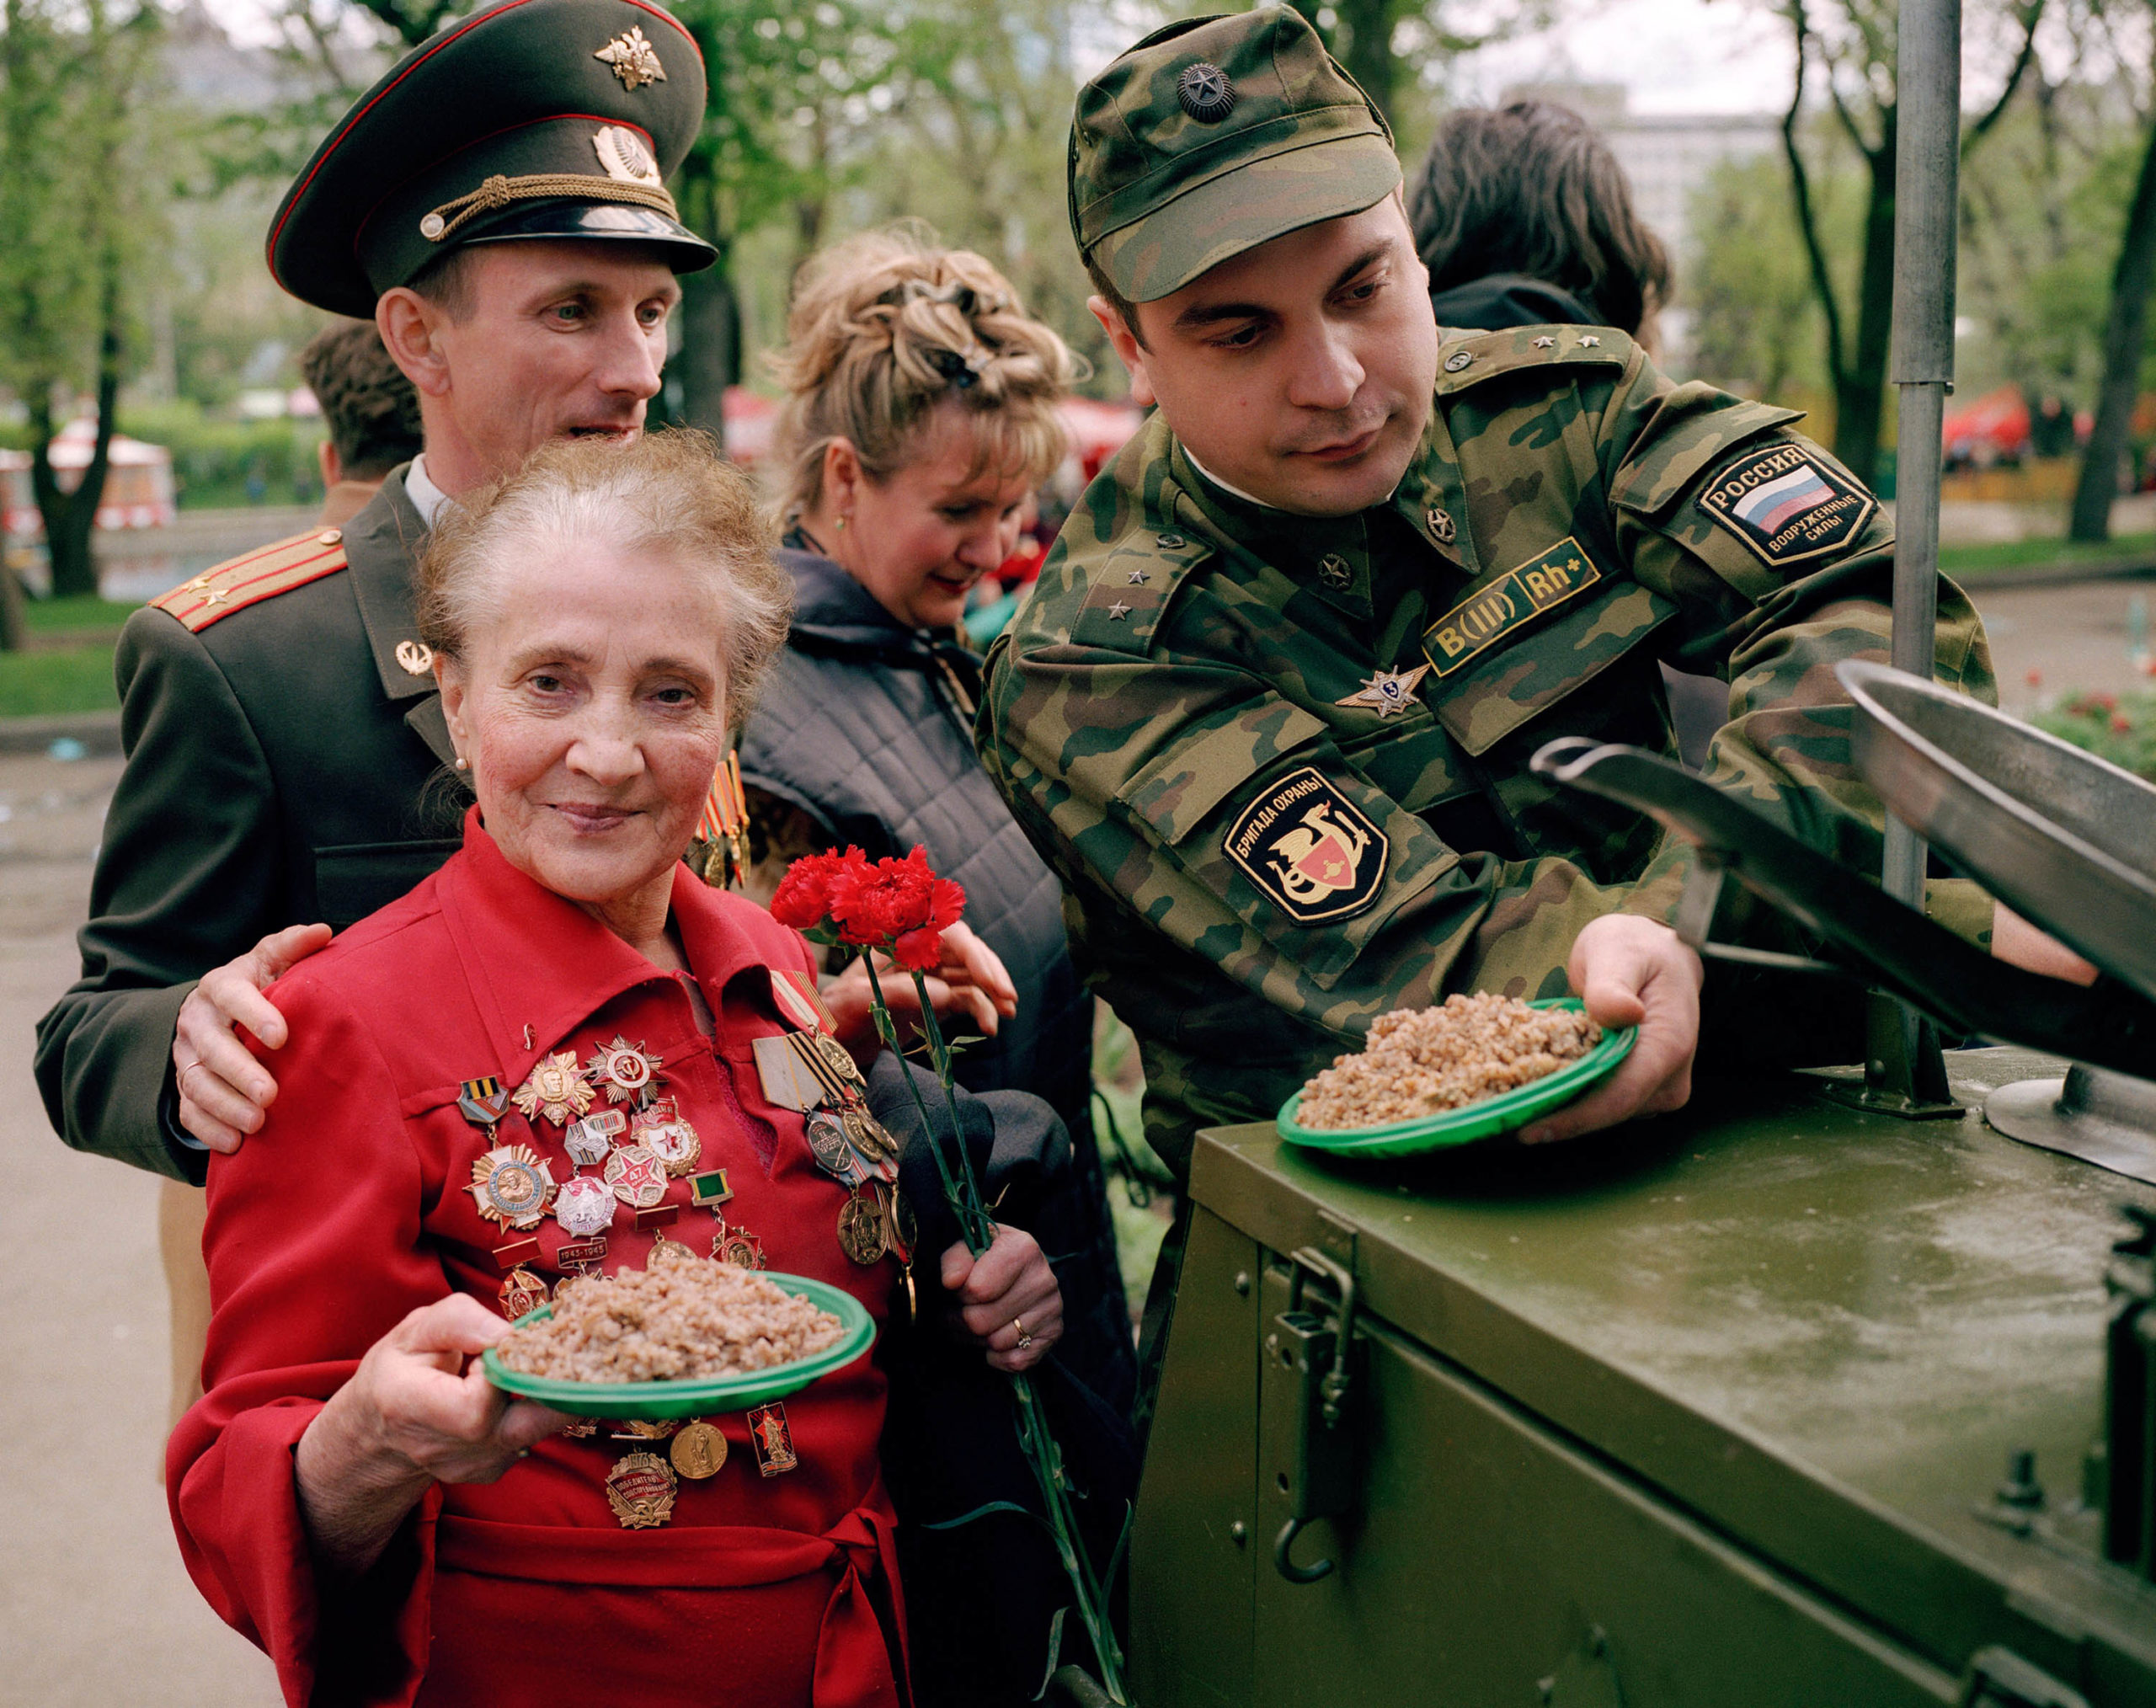 Russia, Moscow. Victory Day. The Russian army gives out food to the veterans.